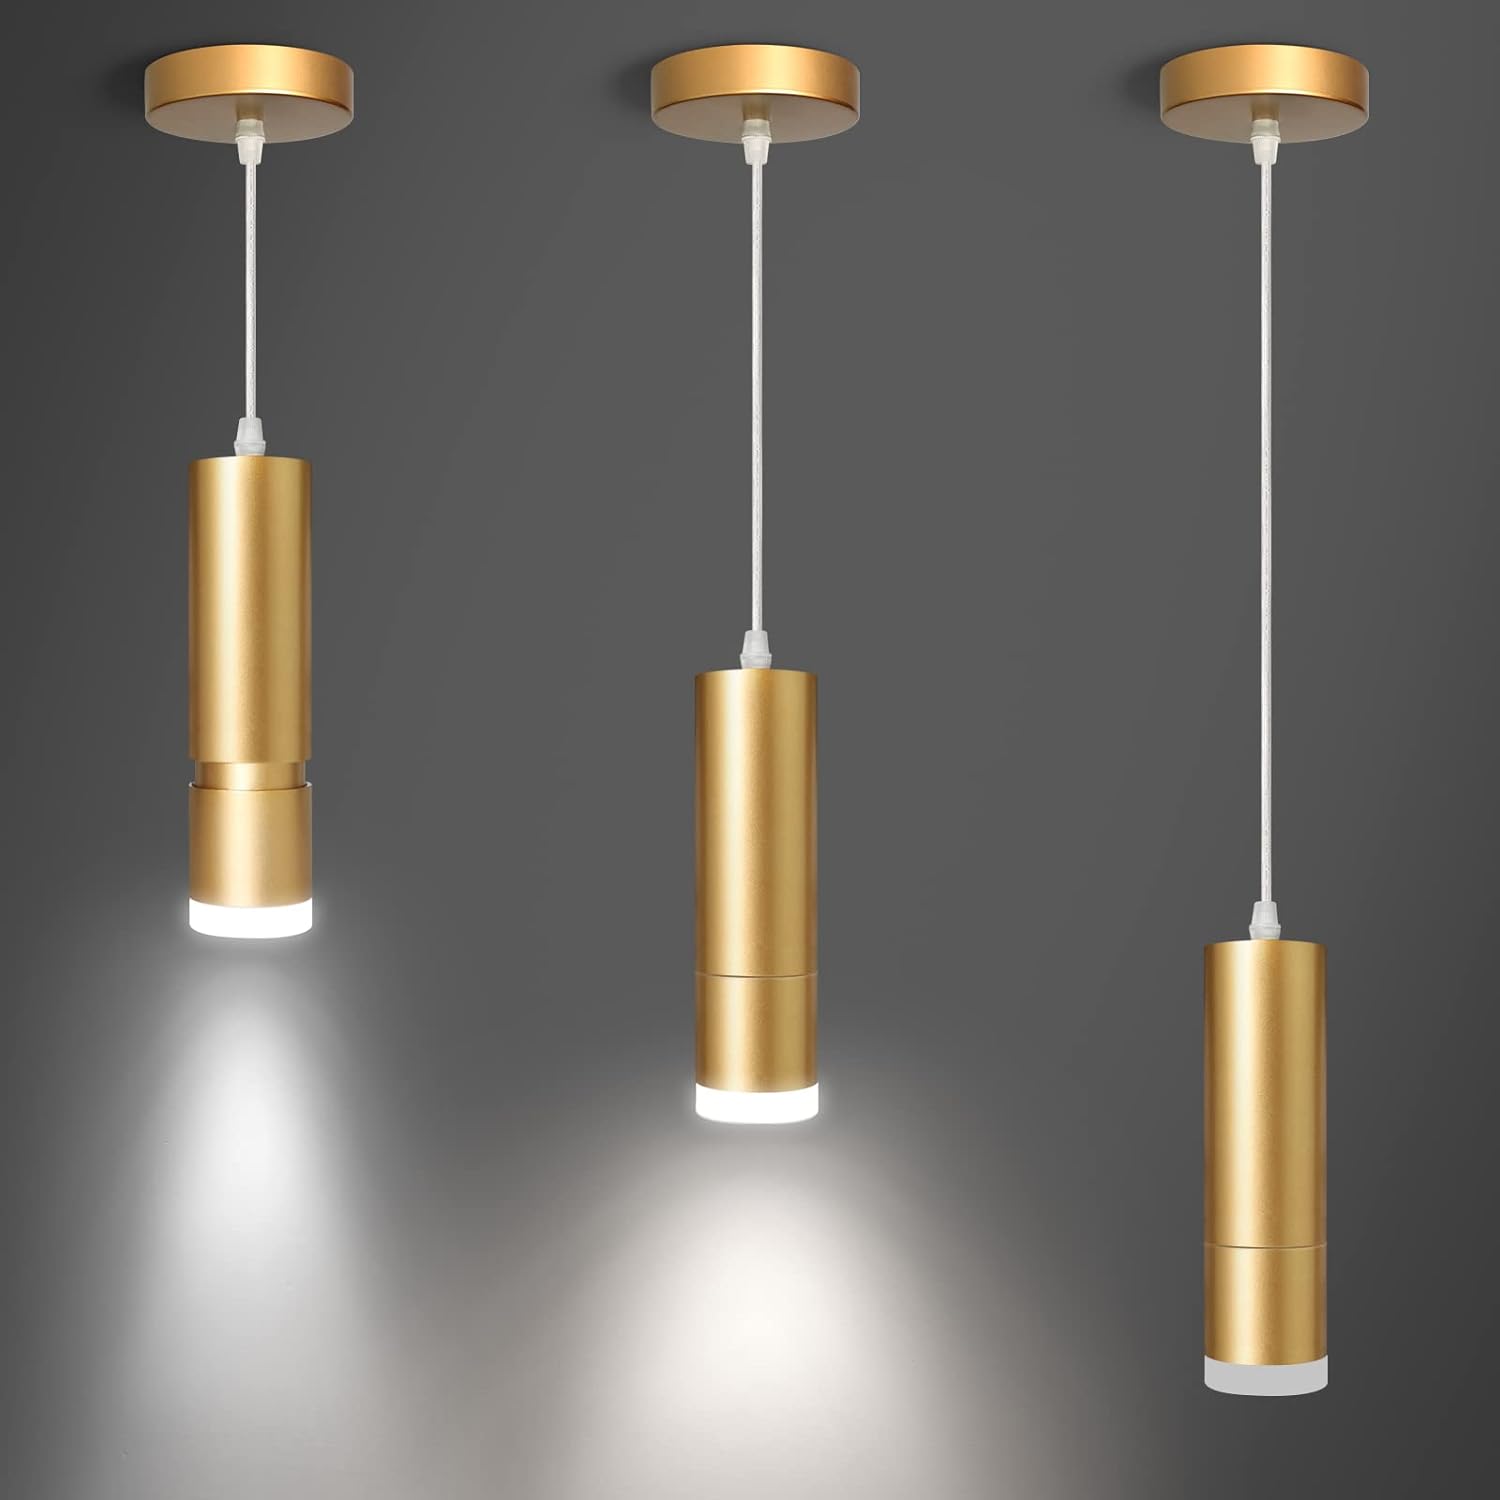 The quality of these lamps exceeded my expectations. It' absolutely stunning. Very stylish, beautiful and reasonably priced. Brings an extra surprise to the room, but doesn't seem overwhelming. Easy to install and love the light it emits. They also give a very modern and elegant look to my bathroom. I am very satisfied with this purchase